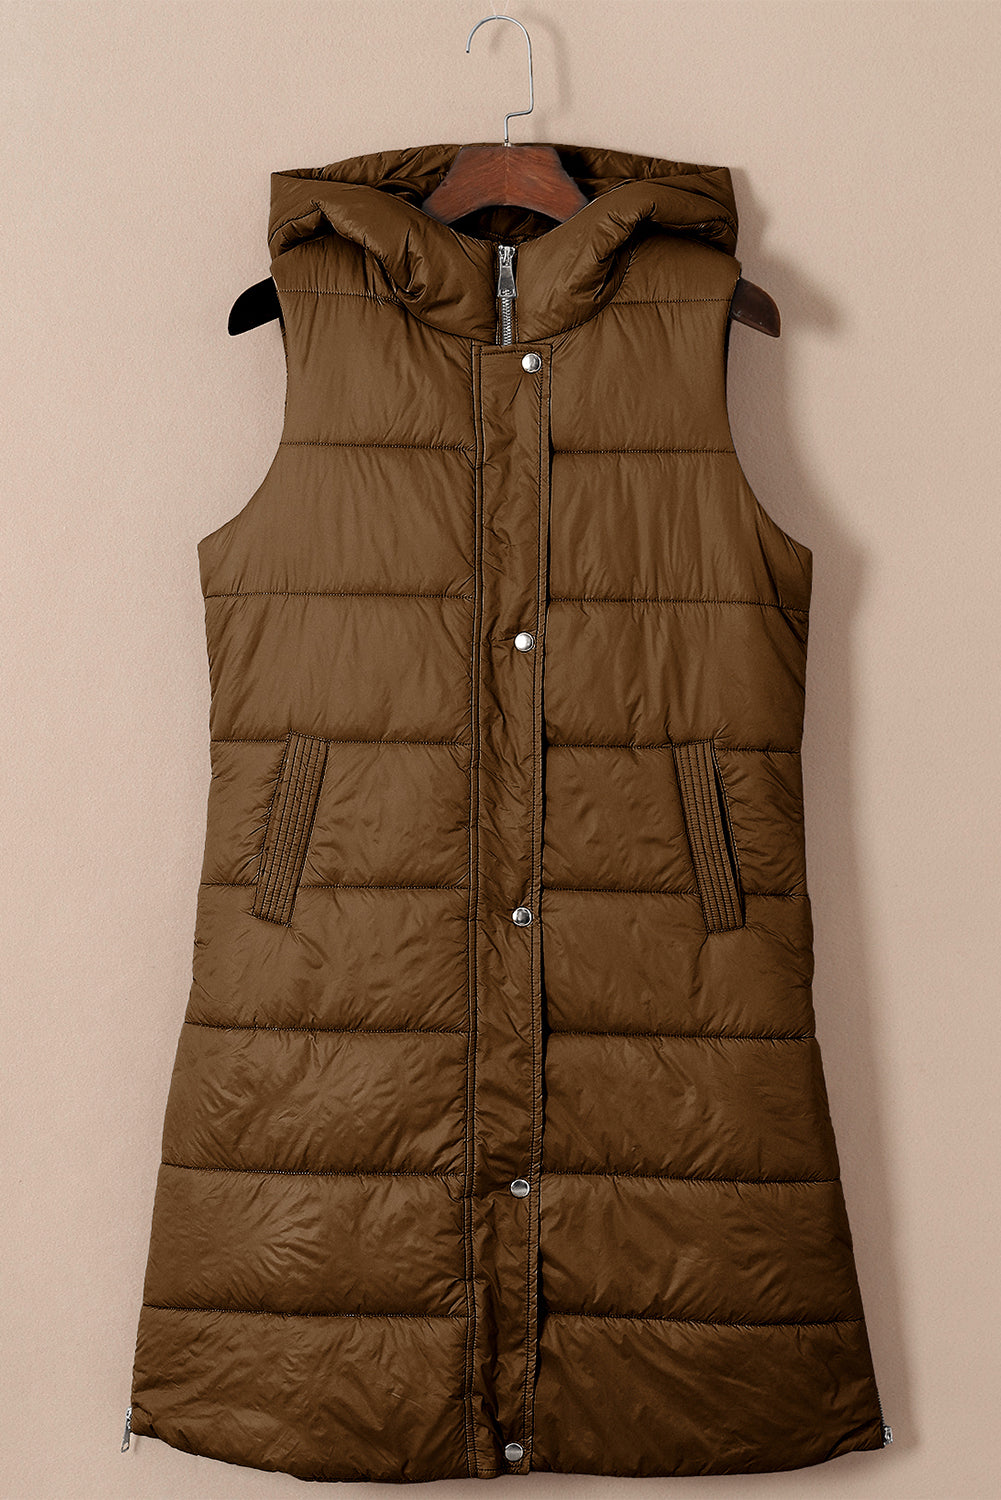 - Green Hooded Long Quilted Vest Coat - 2 colors - women's coat at TFC&H Co.